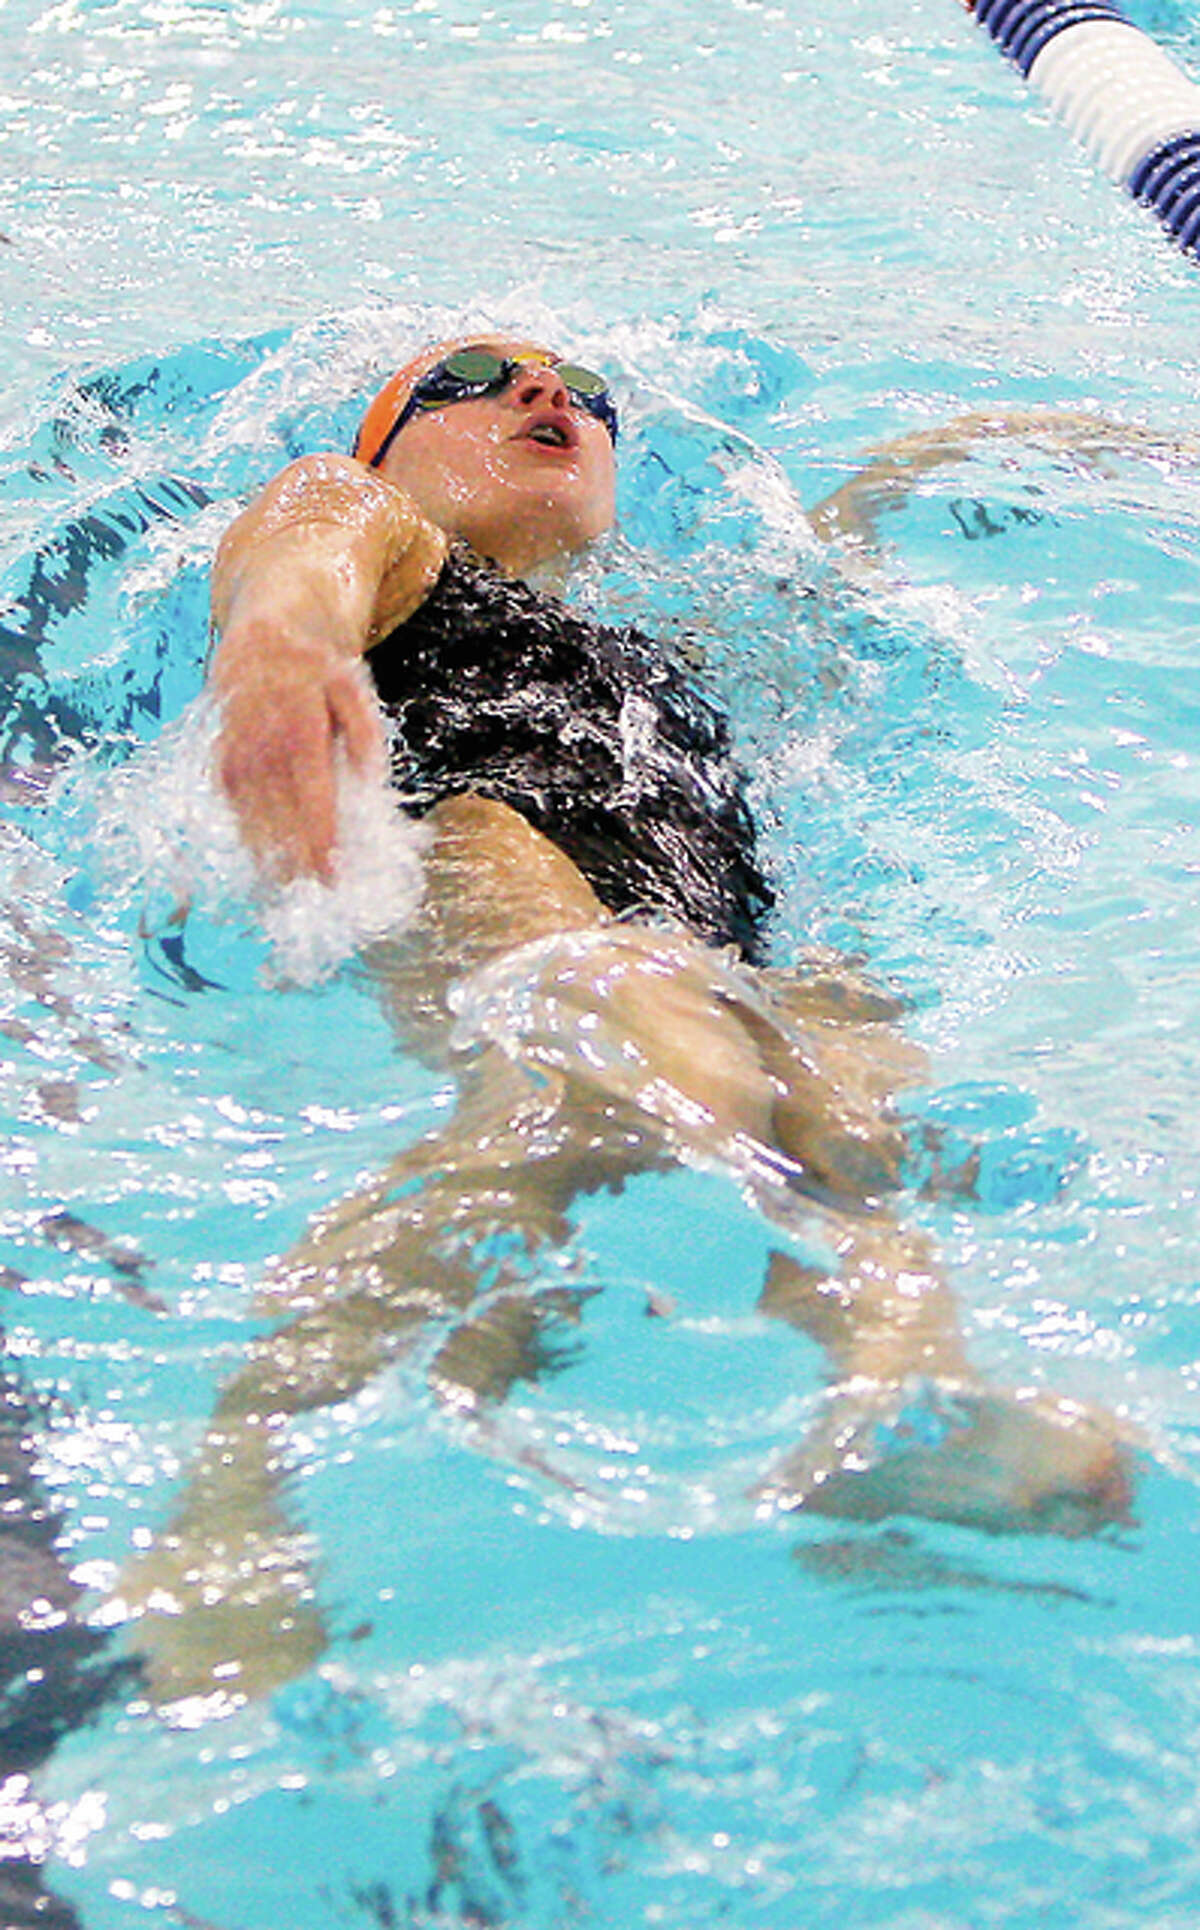 Bailey Grinter of the Edwardsville Breakers swam an Olympic Trials qualfying time in the 100-0meter backstroke Friday night at the US Swimming Speedo Regional VIII Summer Sectionals at the Mizzou Aquatic Center. Grinter will be a junior this fall at Edwardsville High School.